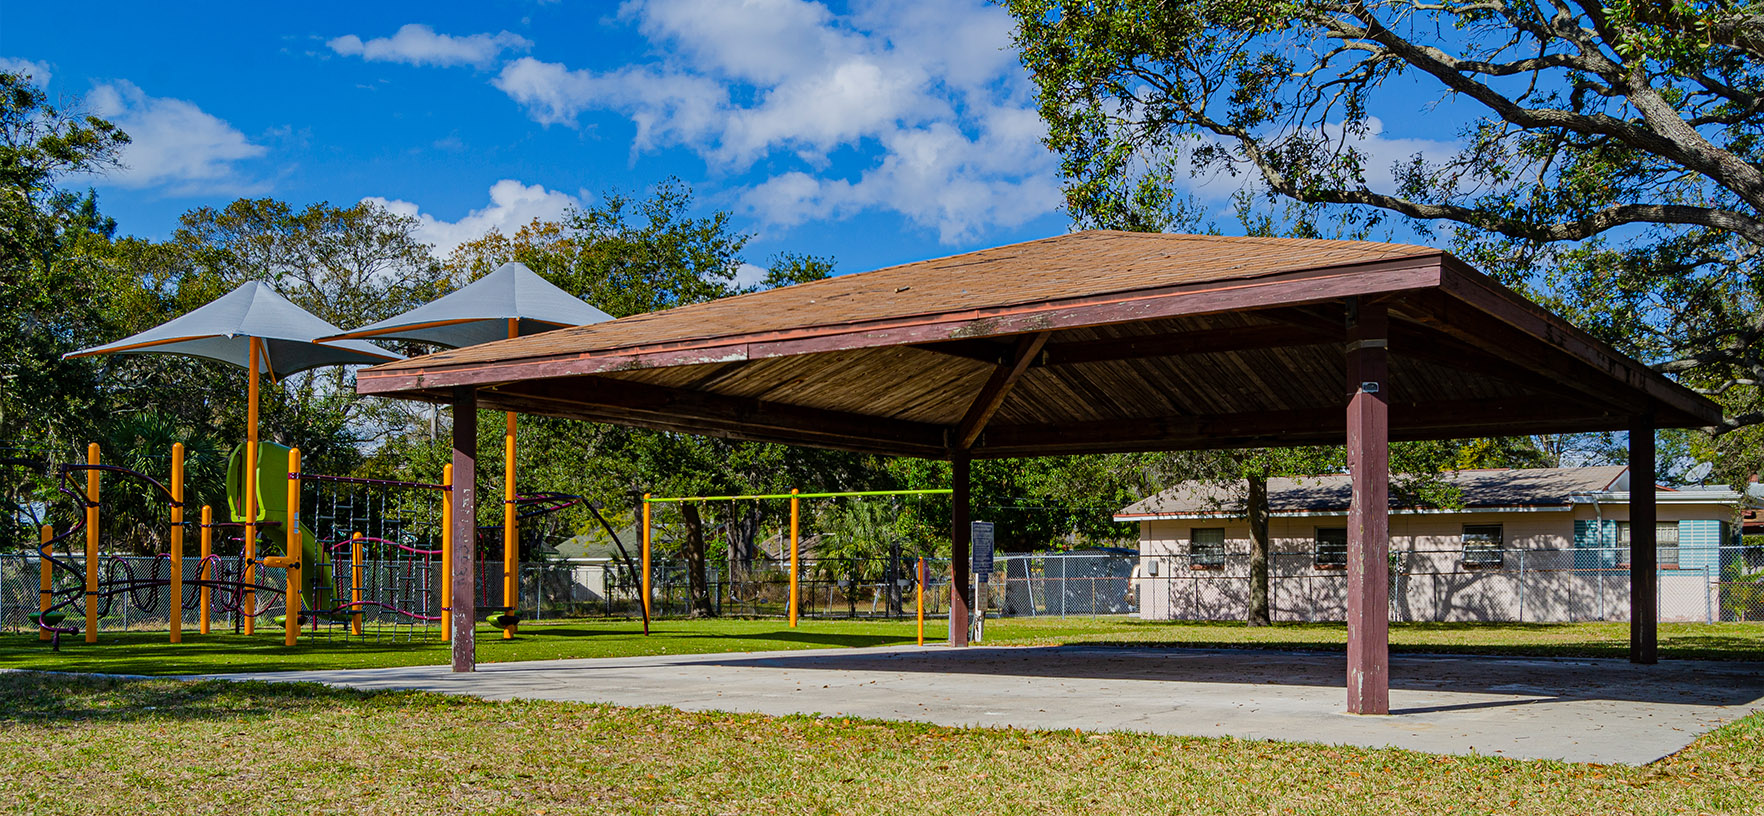 Auburn Street Shelter with the playground in the background